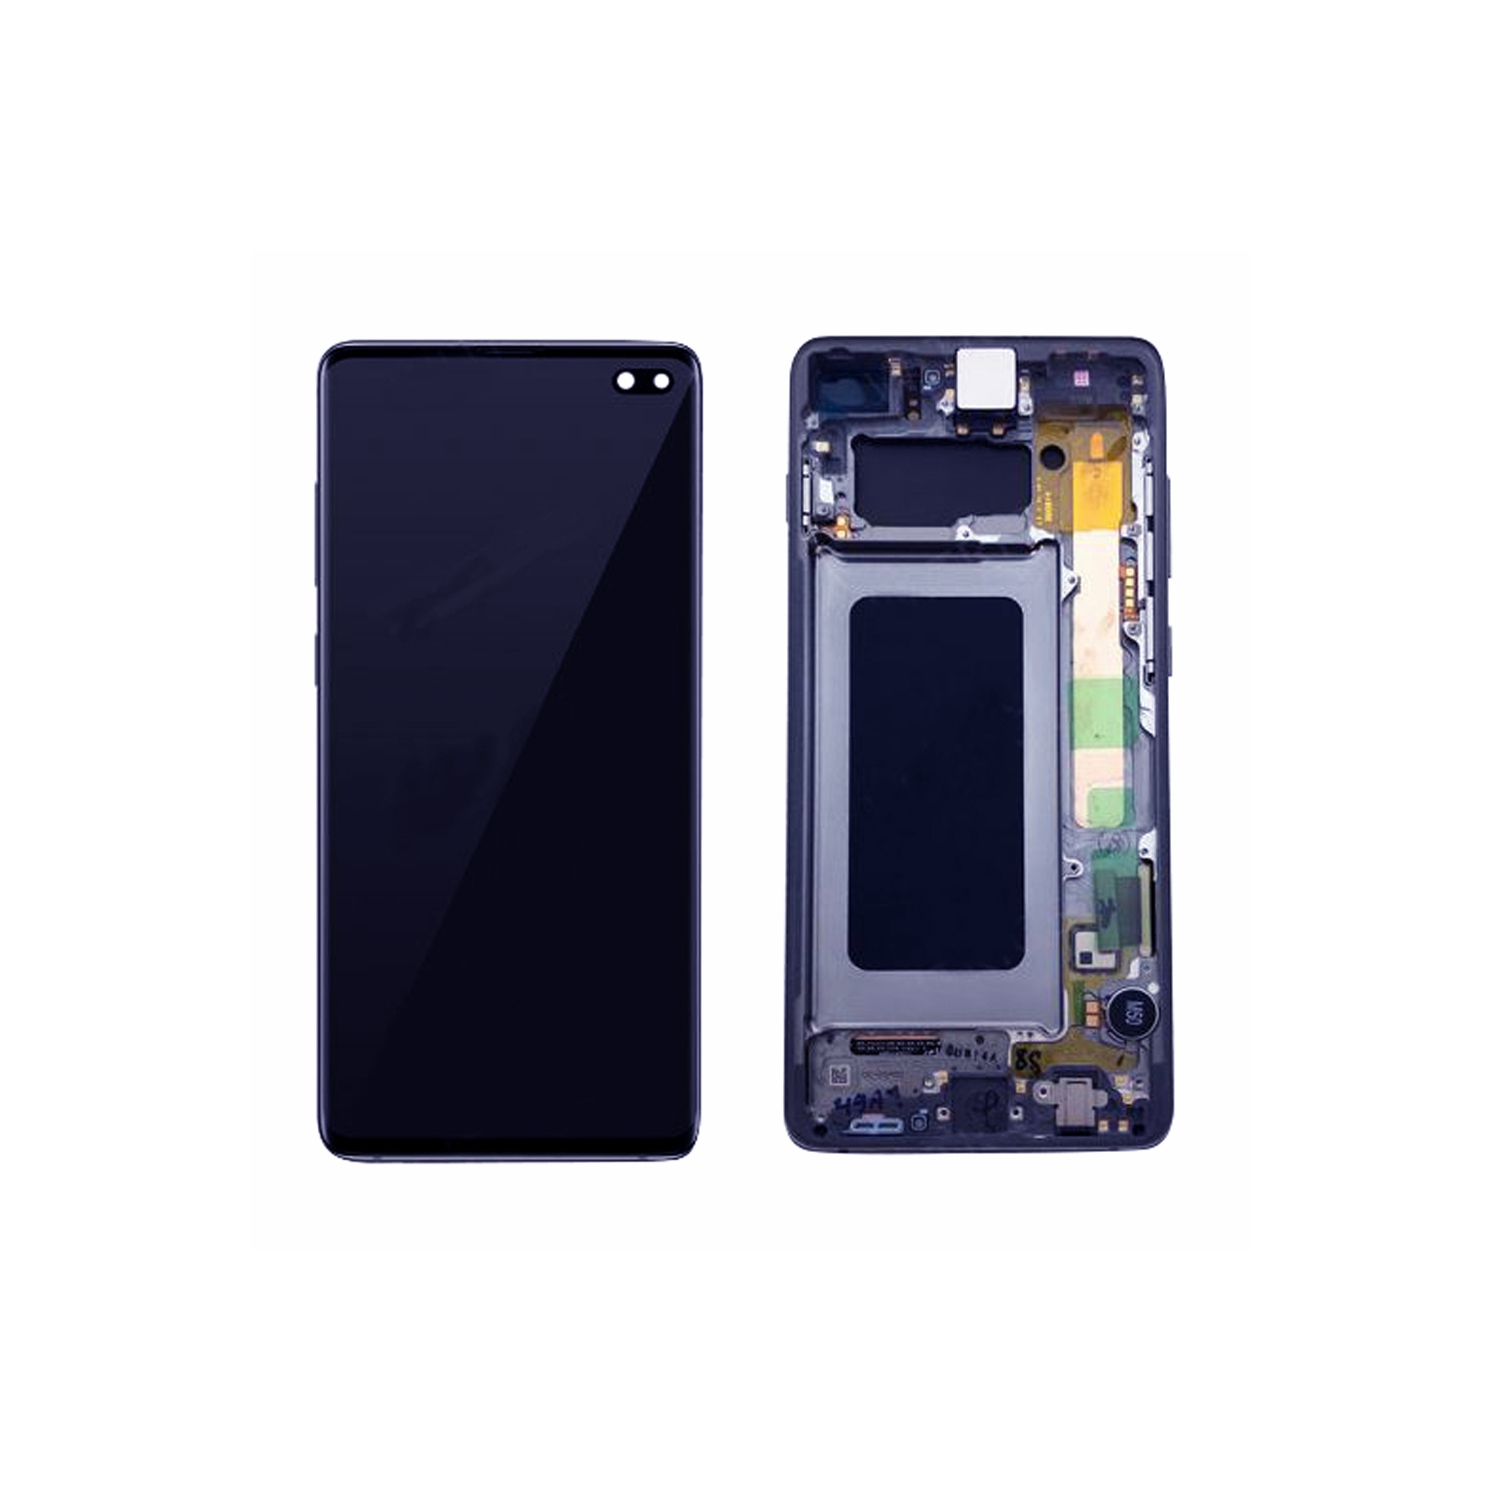 Replacement OLED Display Touch Screen Digitizer Assembly With Frame For Samsung Galaxy S10 Plus SM-G975W - Blue